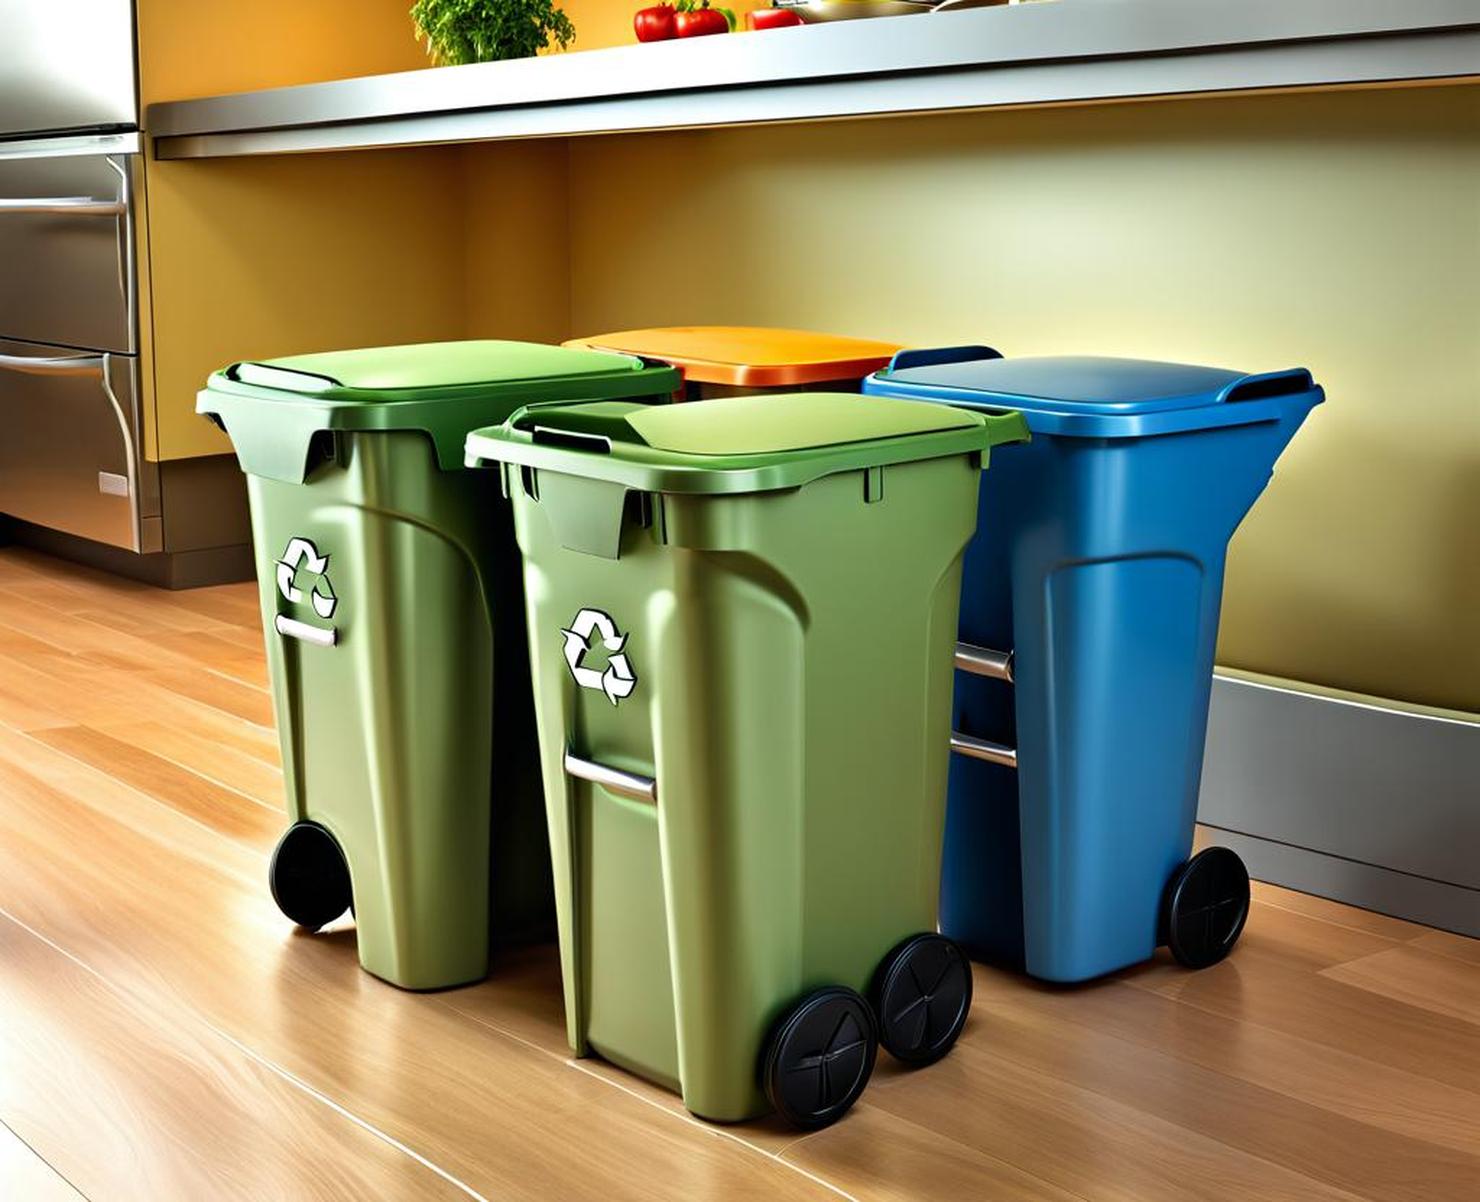 kitchen trash cans with recycle